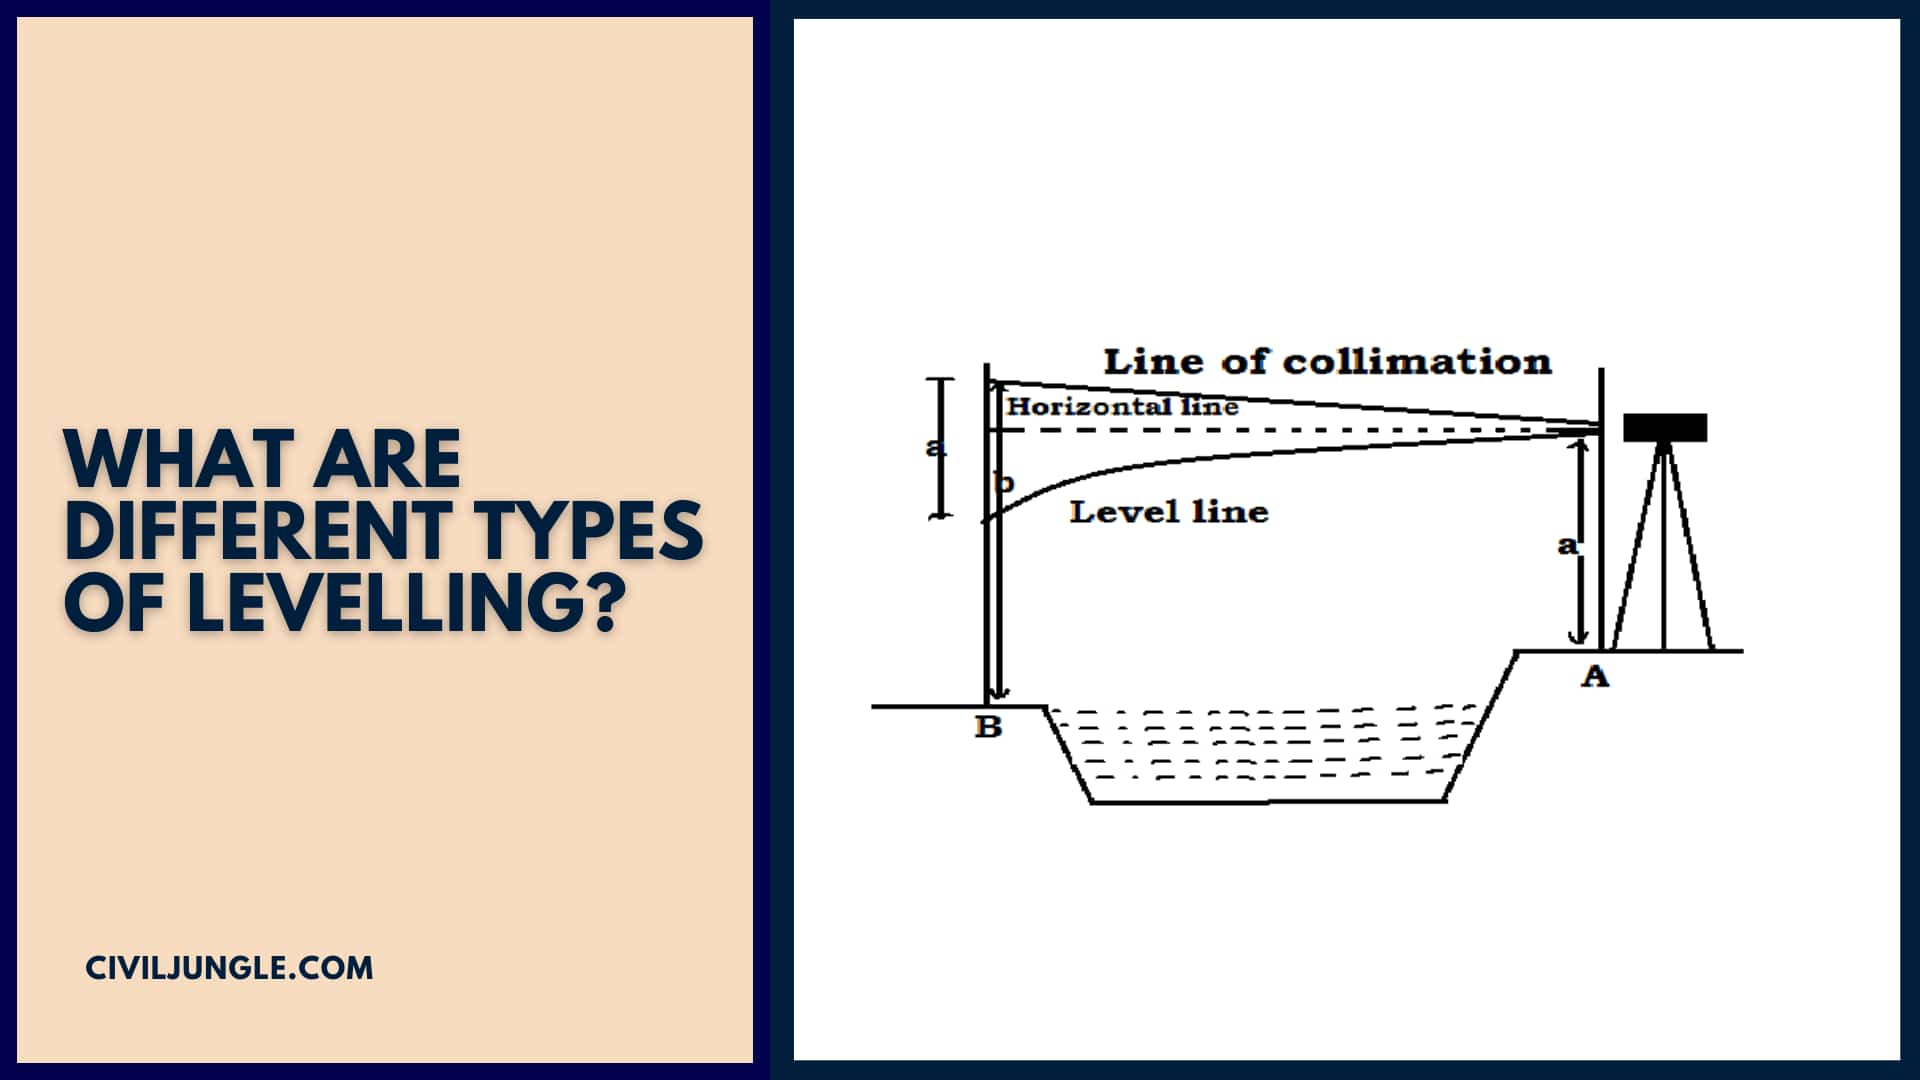 What Are Different Types of Levelling?